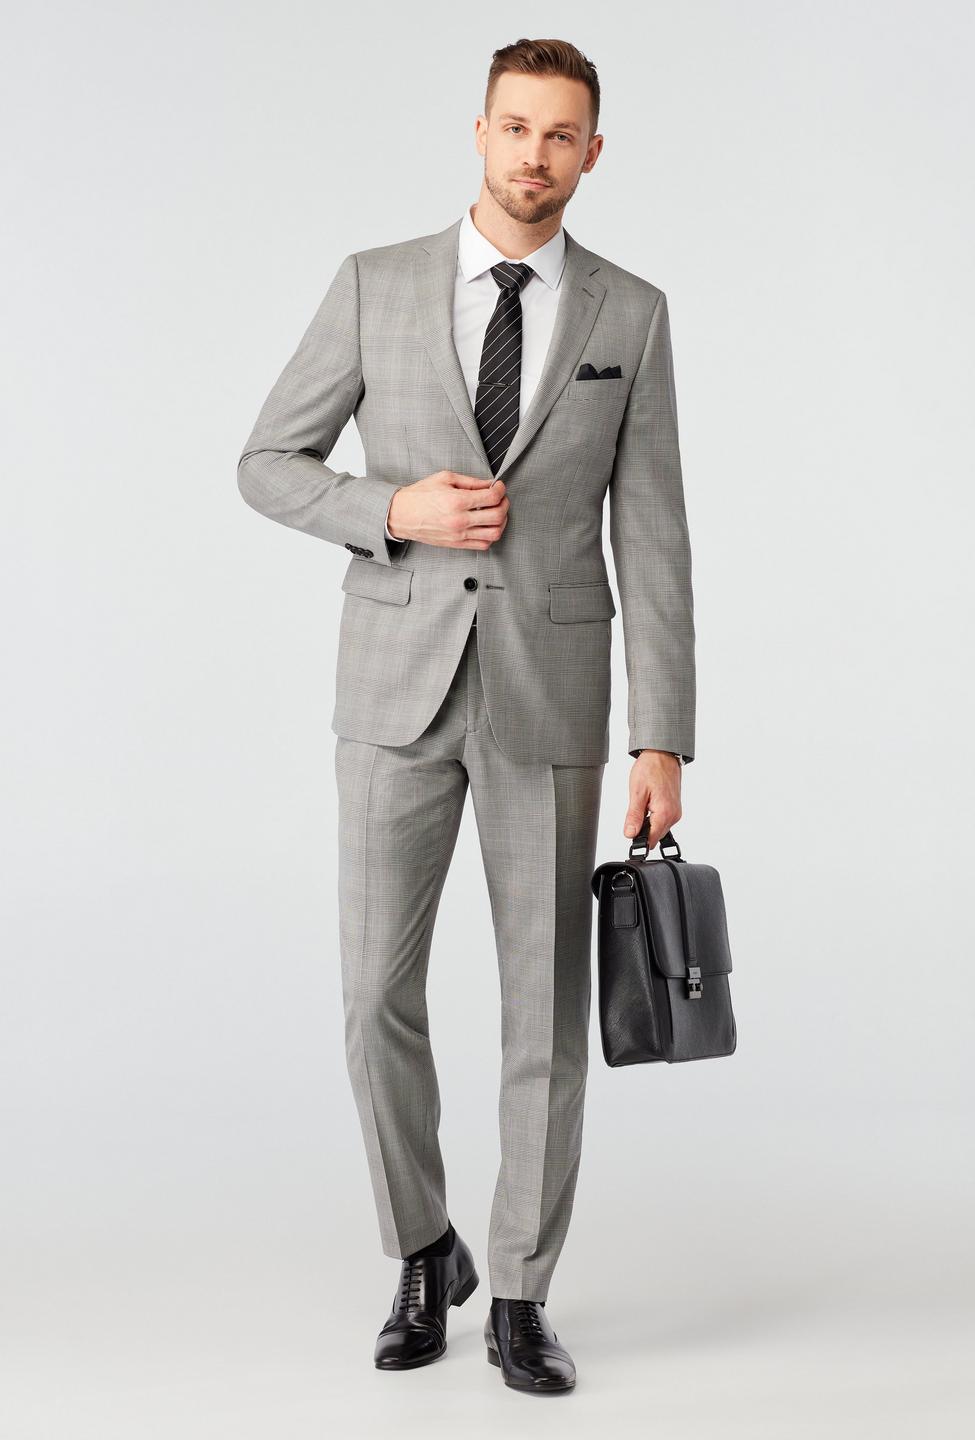 Harrogate Prince of Wales Ivory and Black Suit